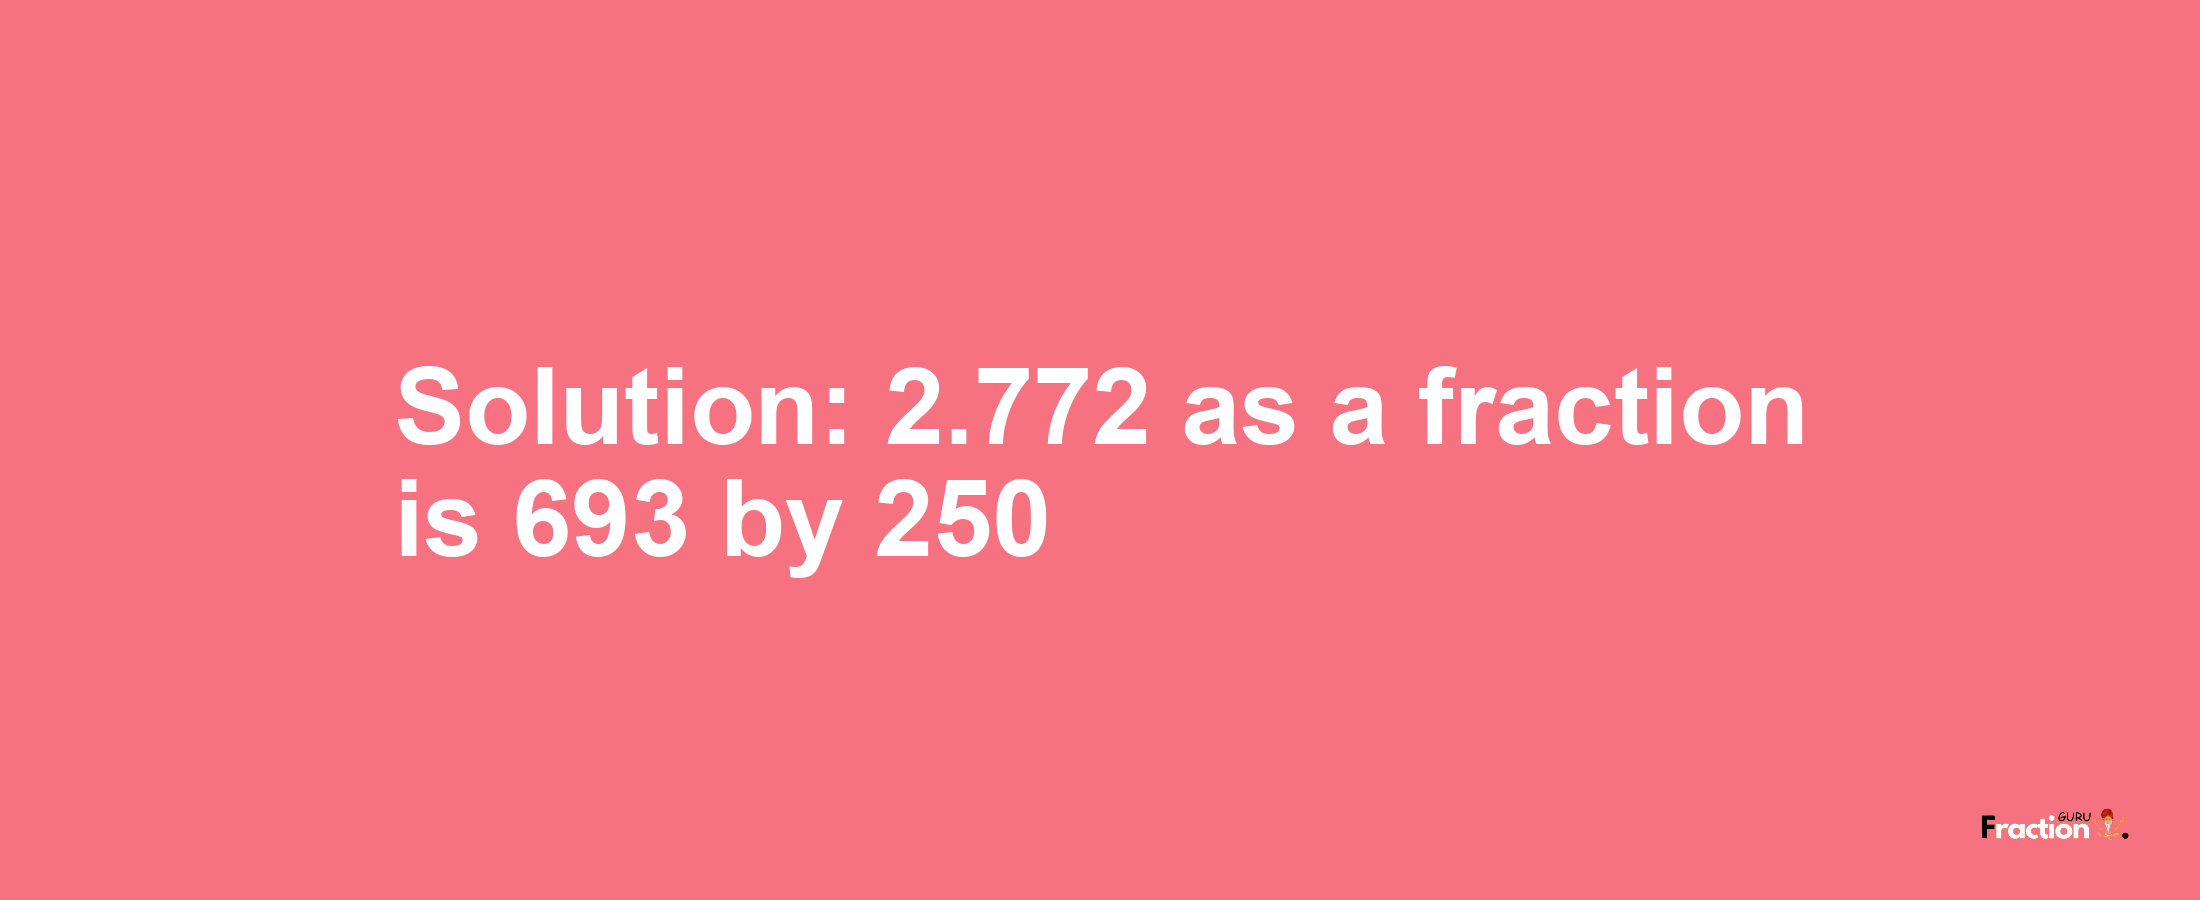 Solution:2.772 as a fraction is 693/250